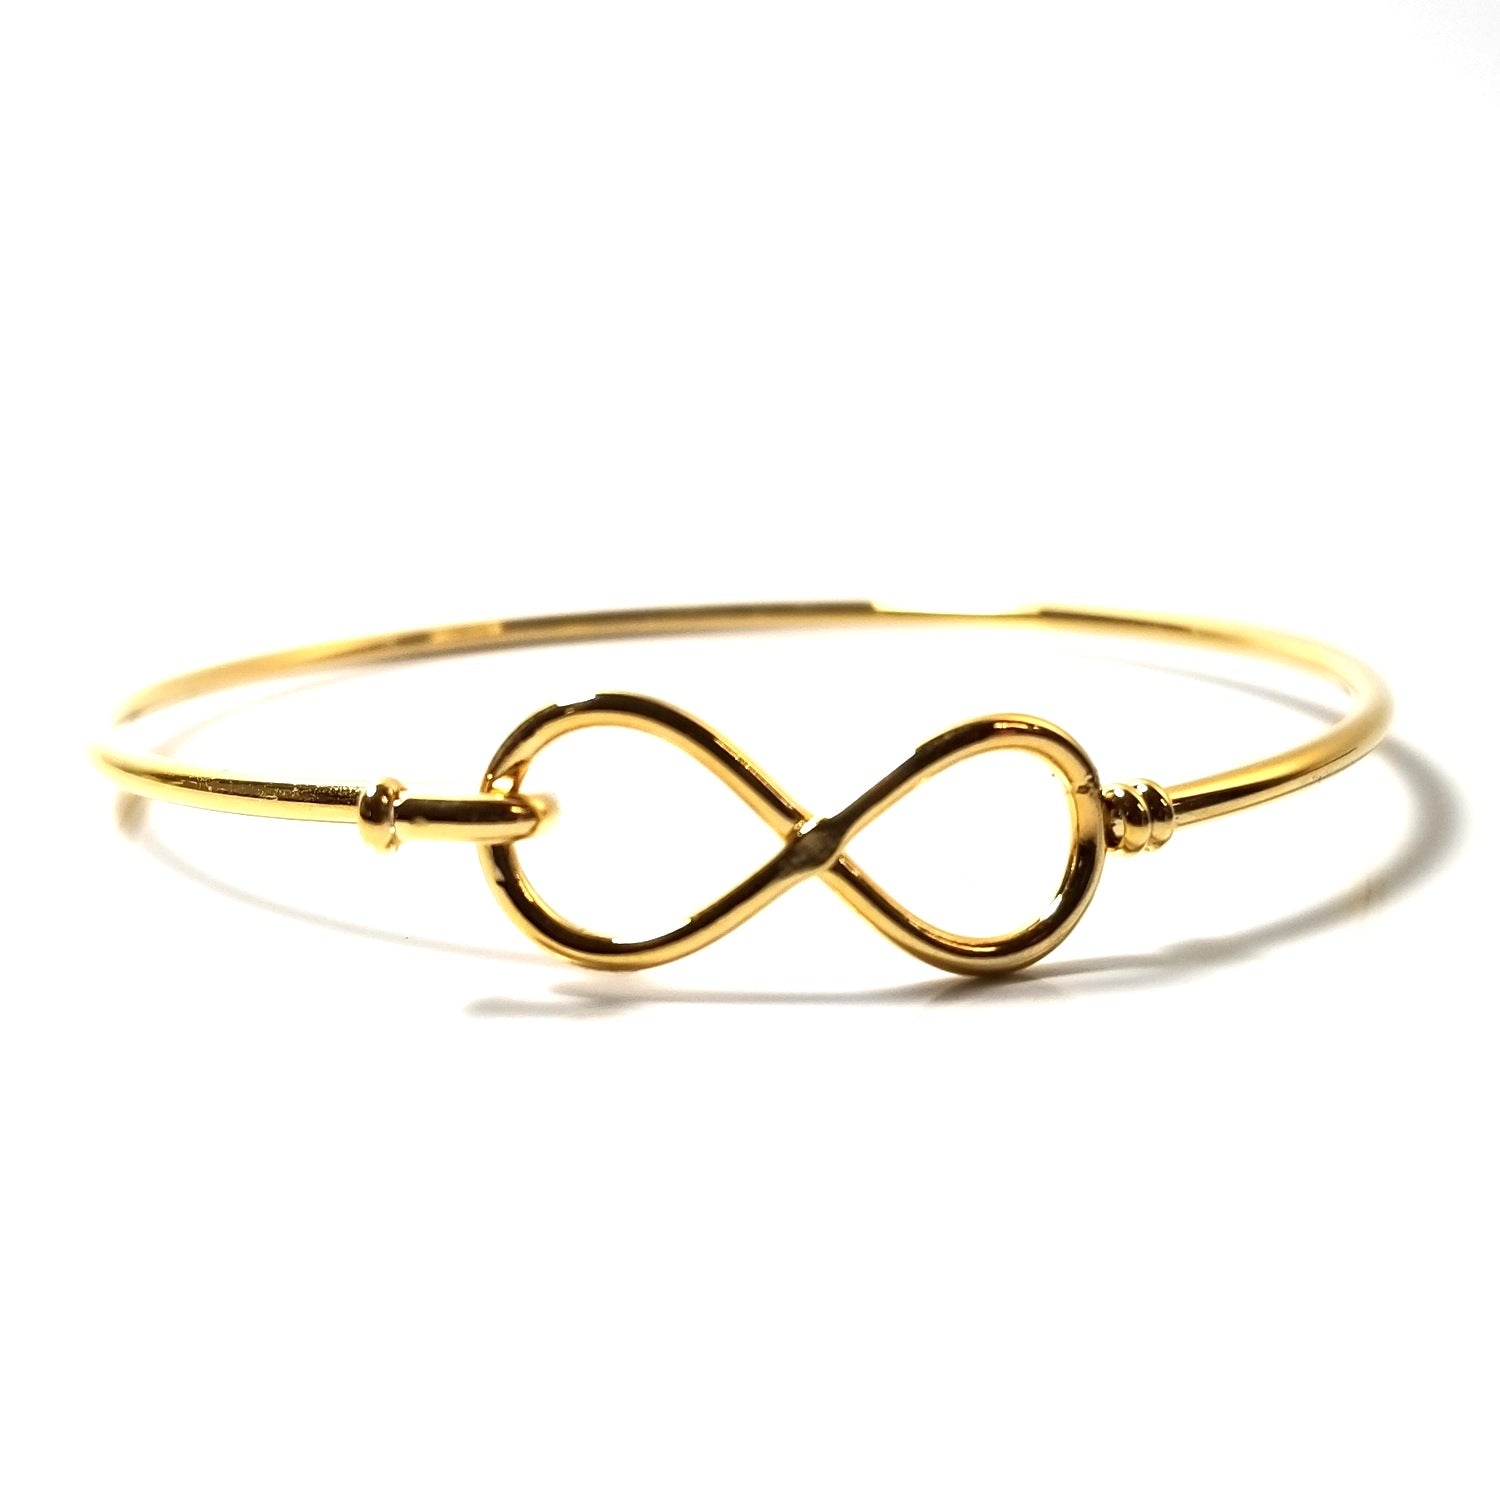 Gold Infinity Bangle Bracelet, Stainless Steel, Charm Jewelry Finding, -  Jewelry Tool Box